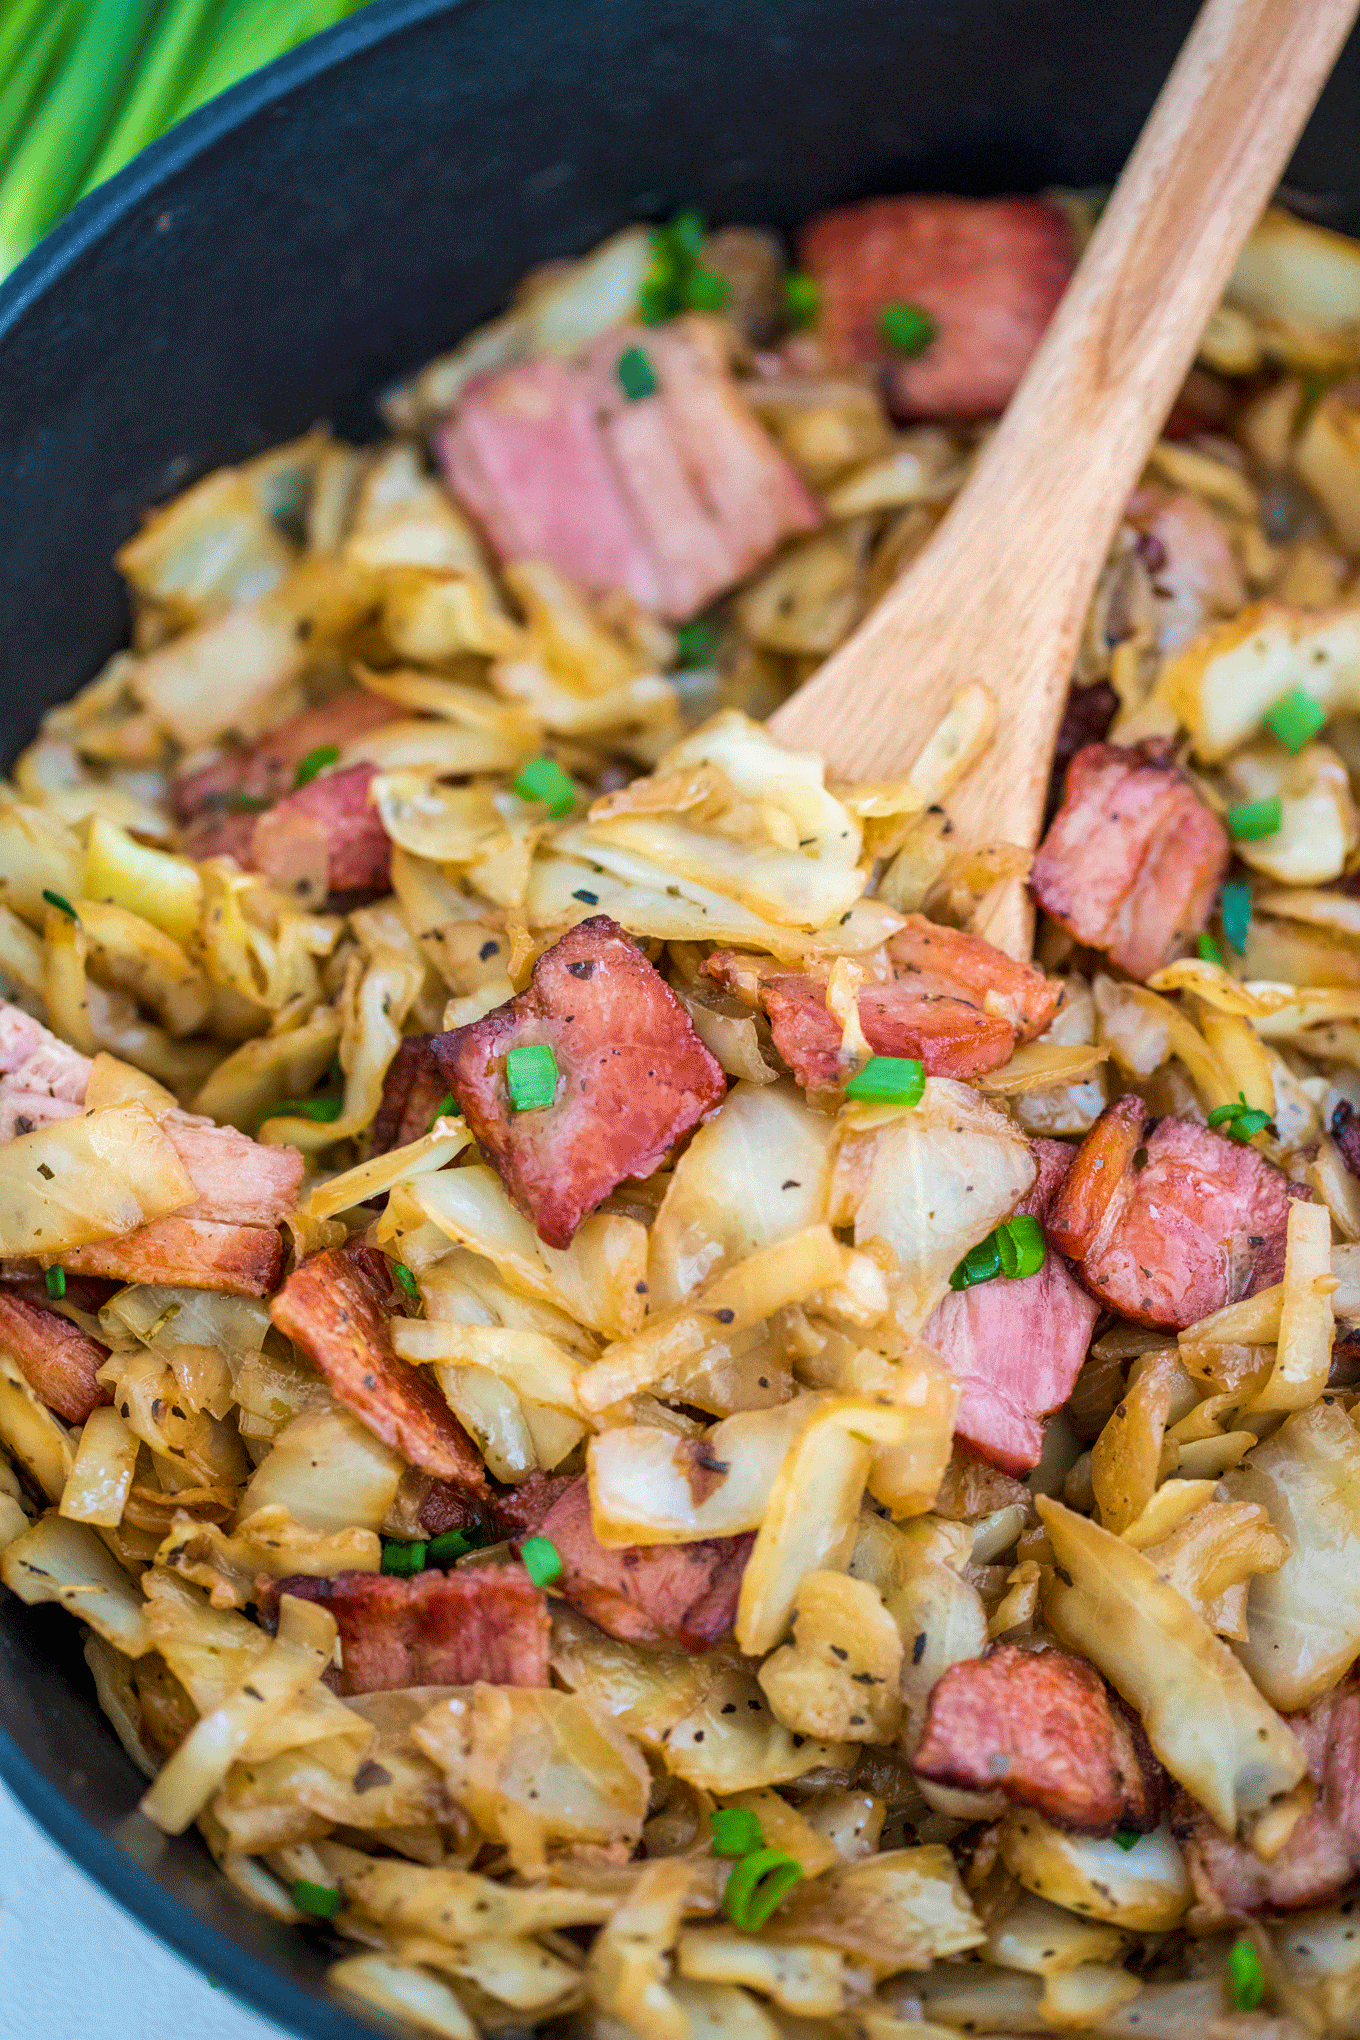 Easy Bacon Fried Cabbage Video Sweet And Savory Meals,How Long To Bake Bacon At 425